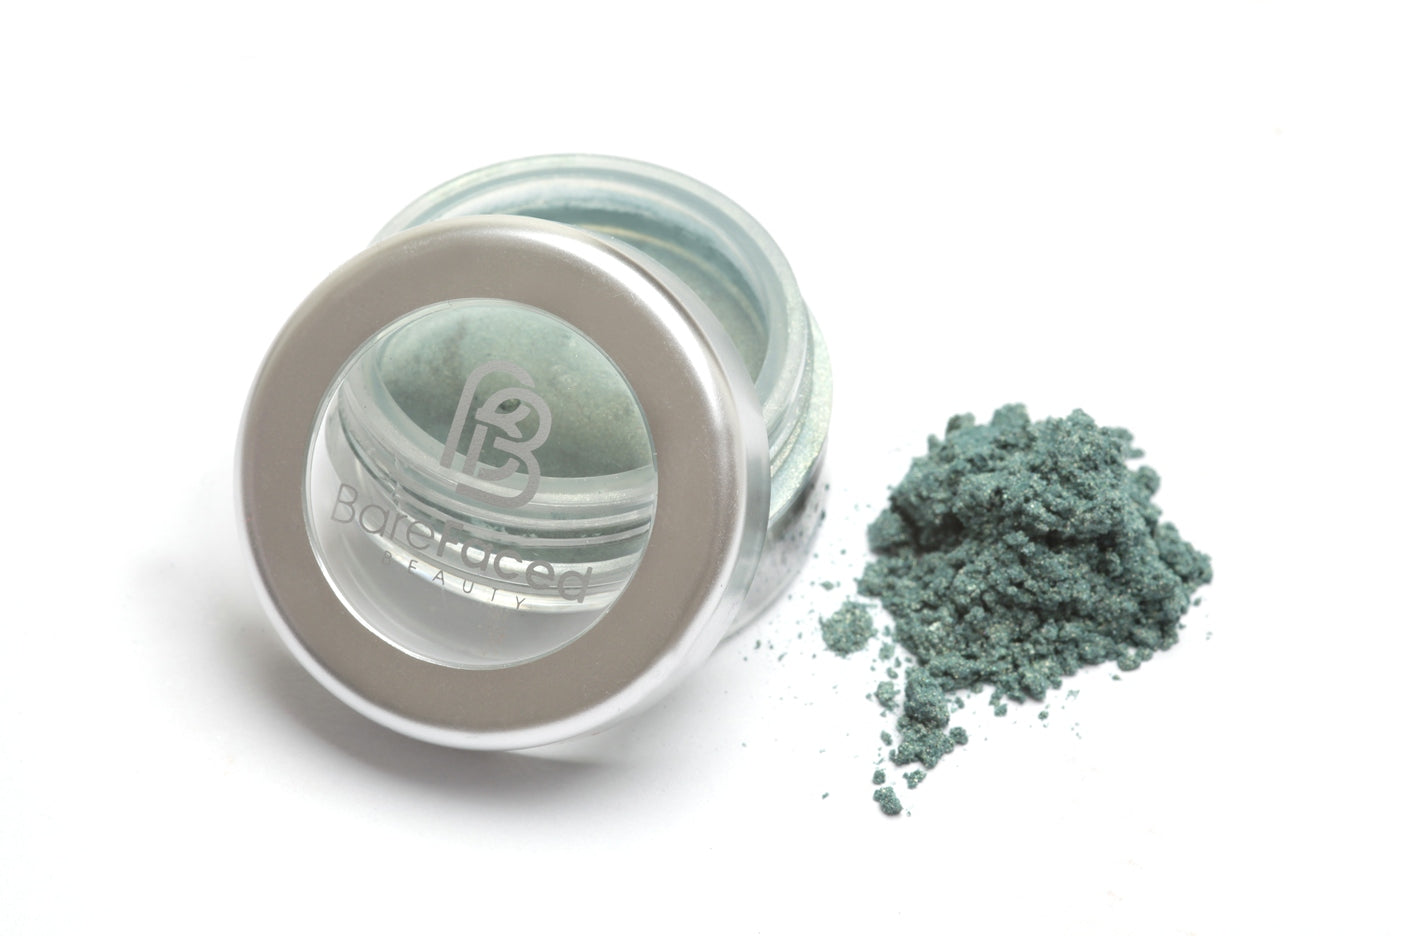 A small round pot of mineral eyeshadow, with a swatch of the powder next to it showing a sparkly aqua marine